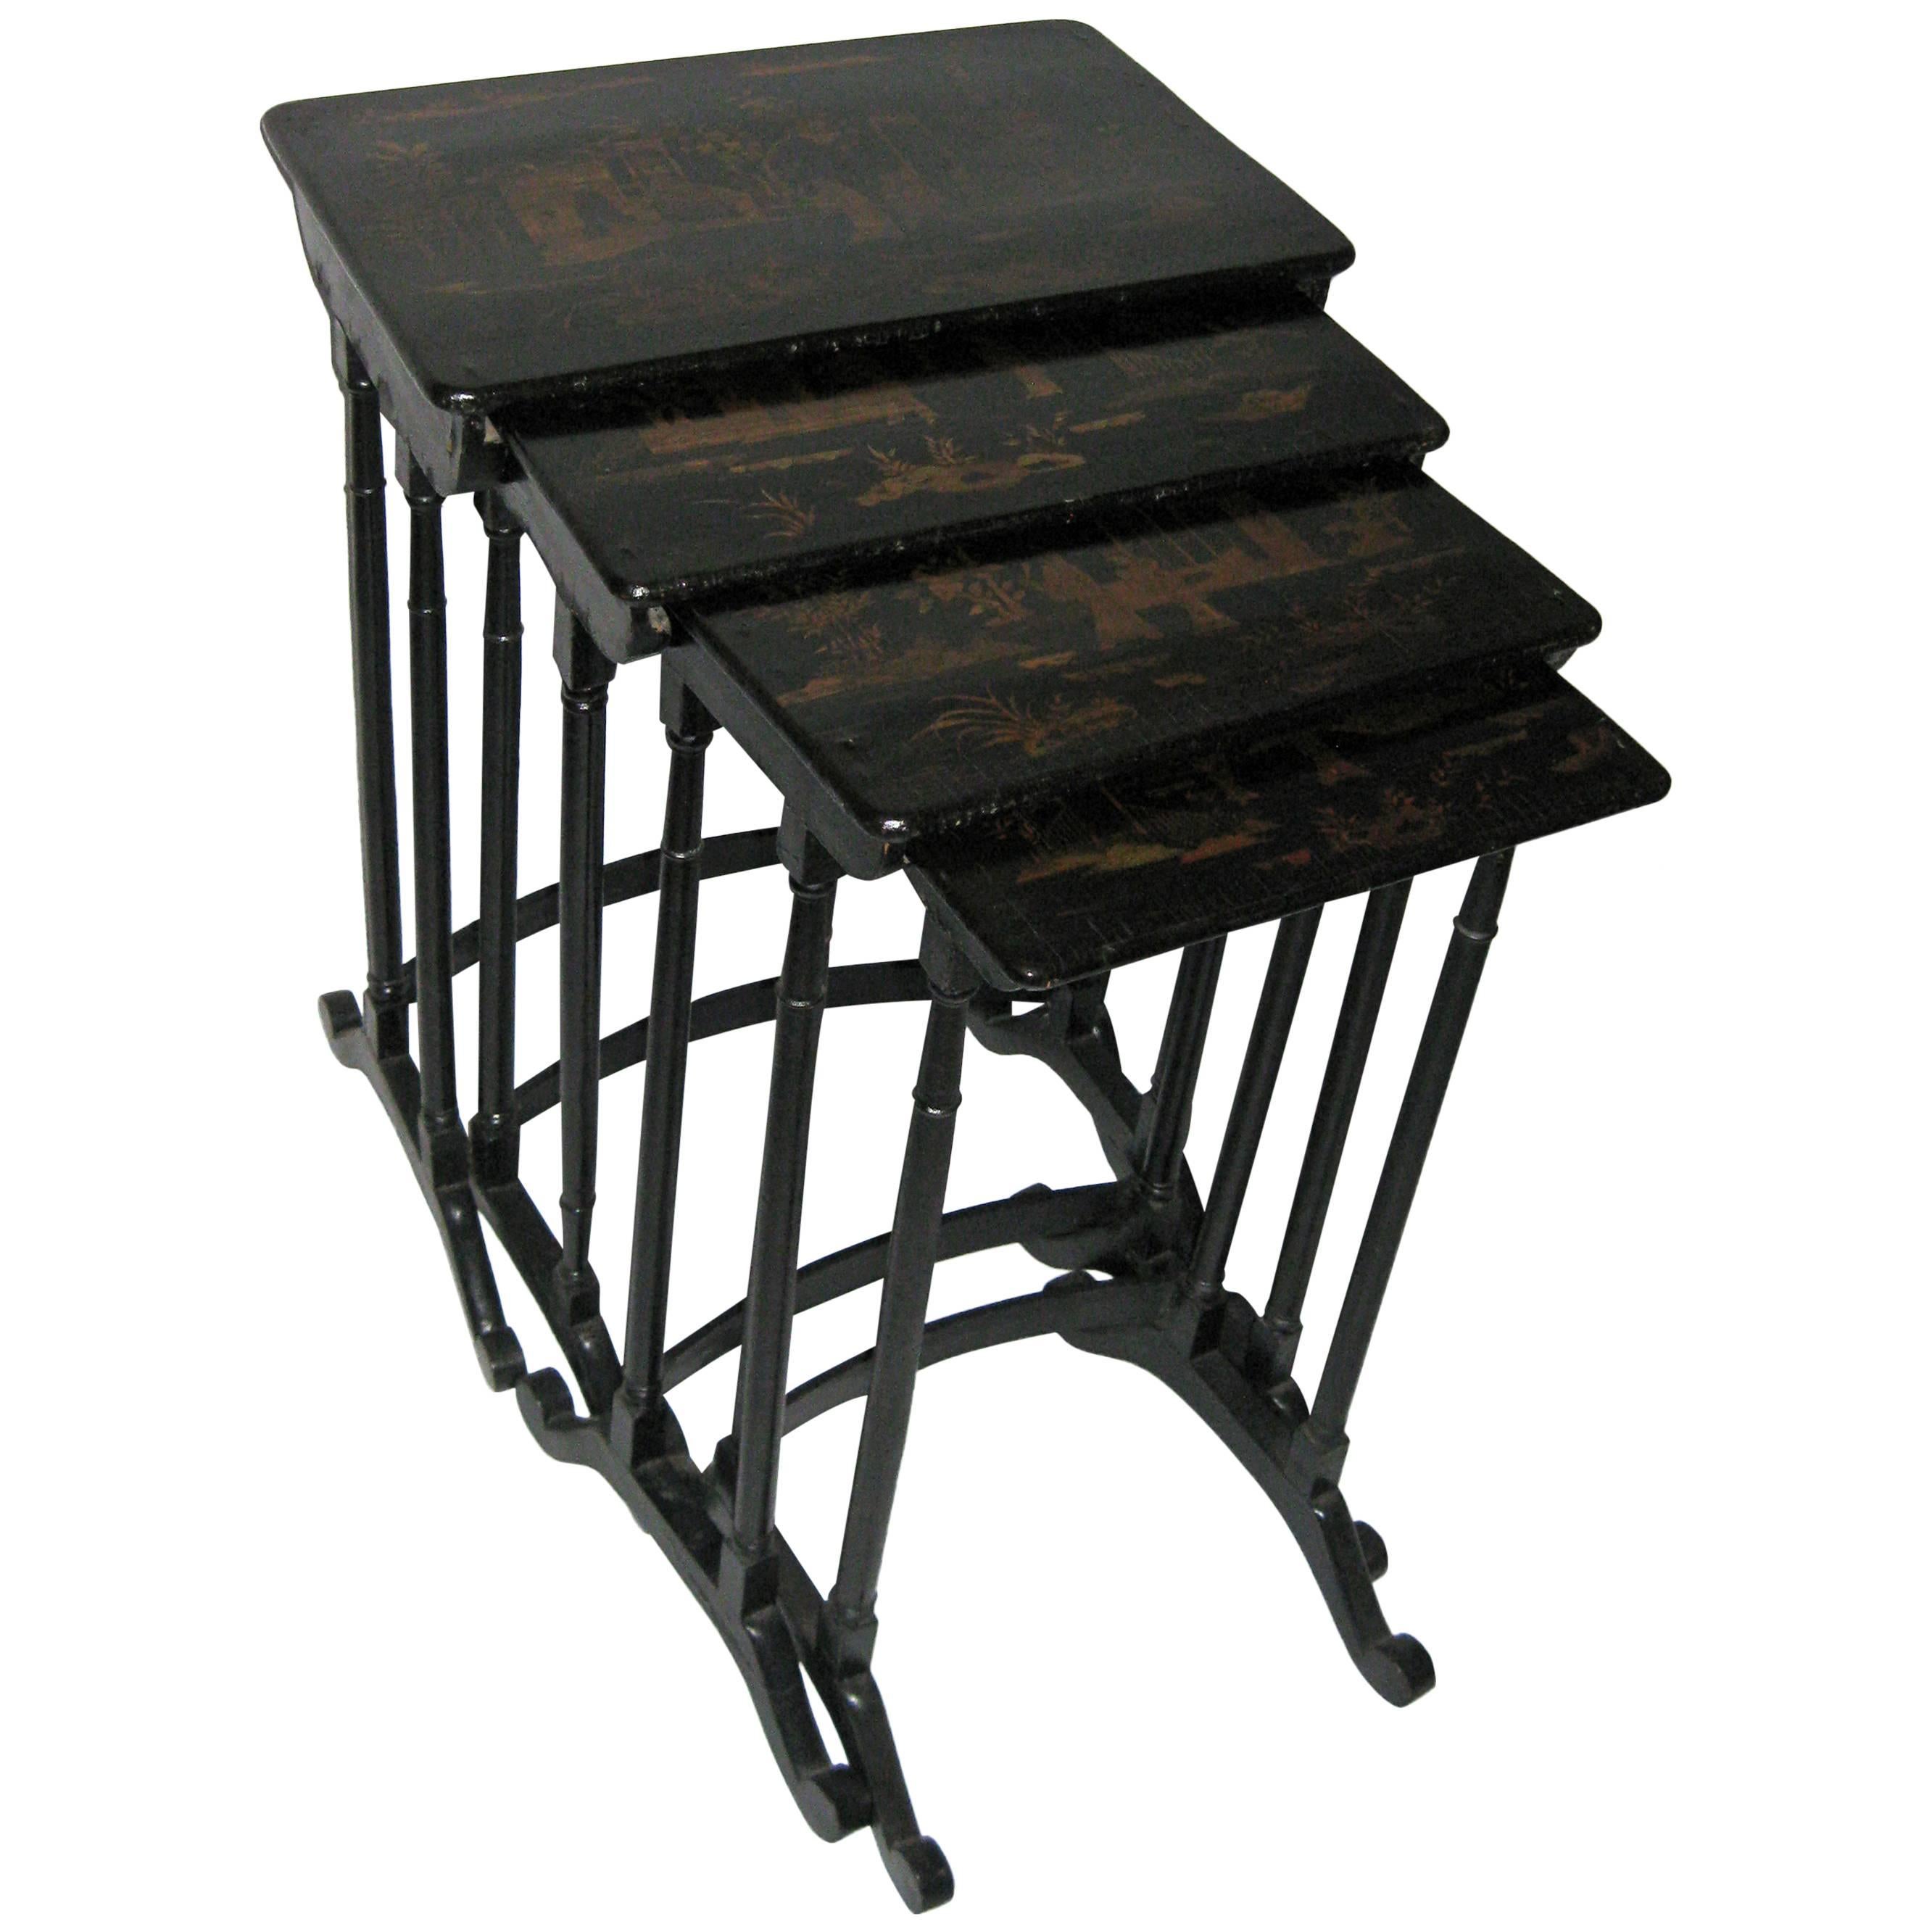 19th century Set of Four Black Lacquered Japanned Chinoiserie Nesting Tables